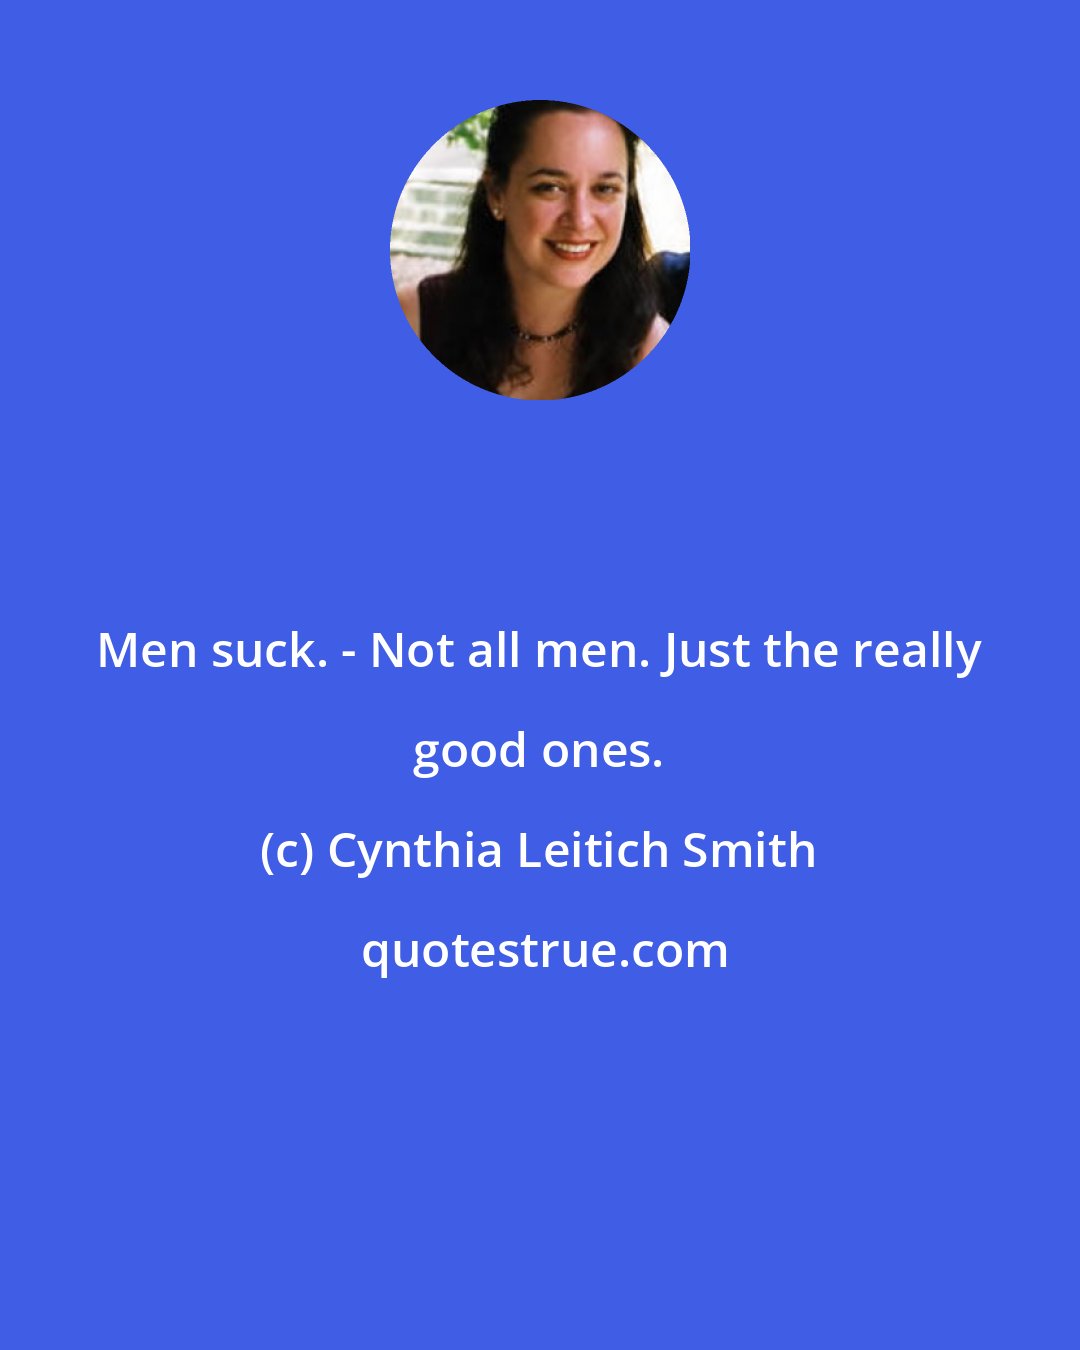 Cynthia Leitich Smith: Men suck. - Not all men. Just the really good ones.